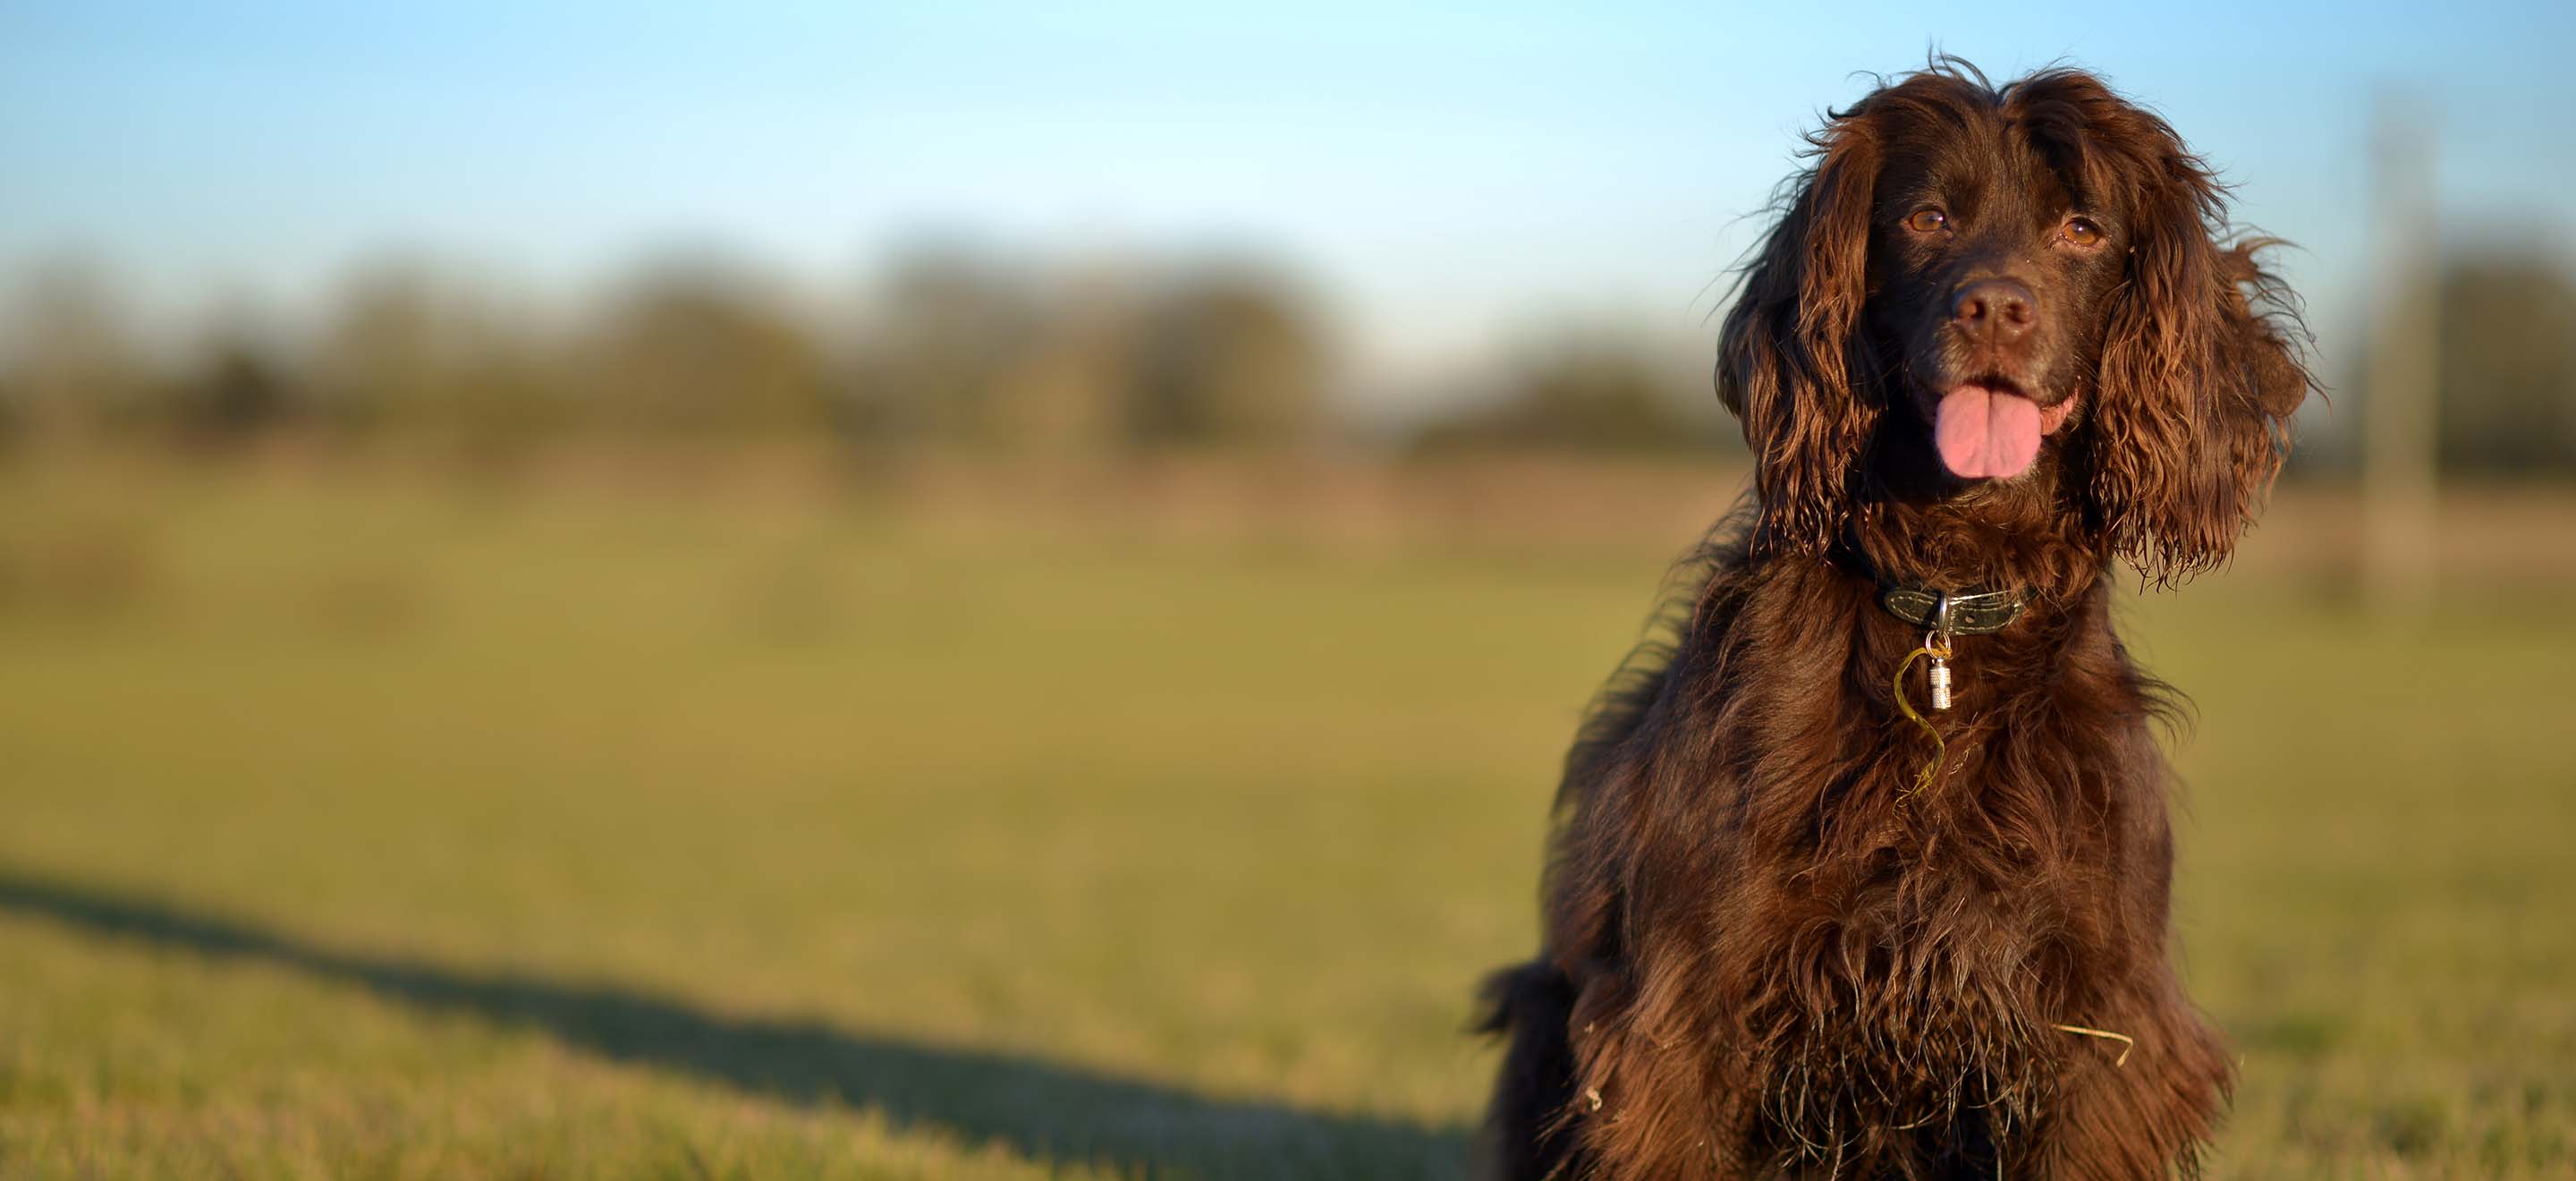 A Field Spaniel dog standing in a grassy field image